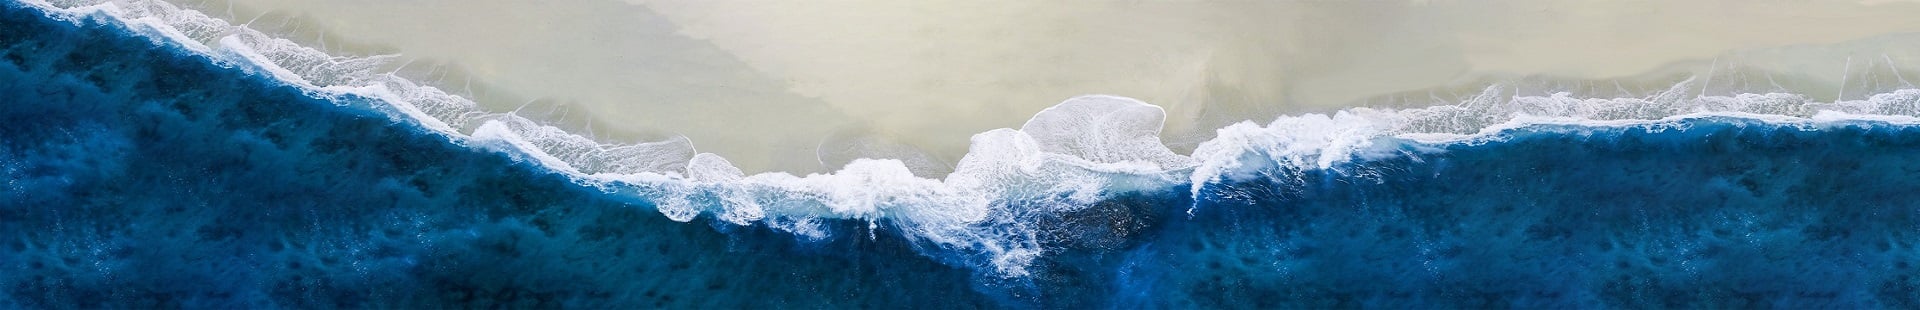 bnr-waves-crashing-on-beach-viewed-from-above-01-variation-03